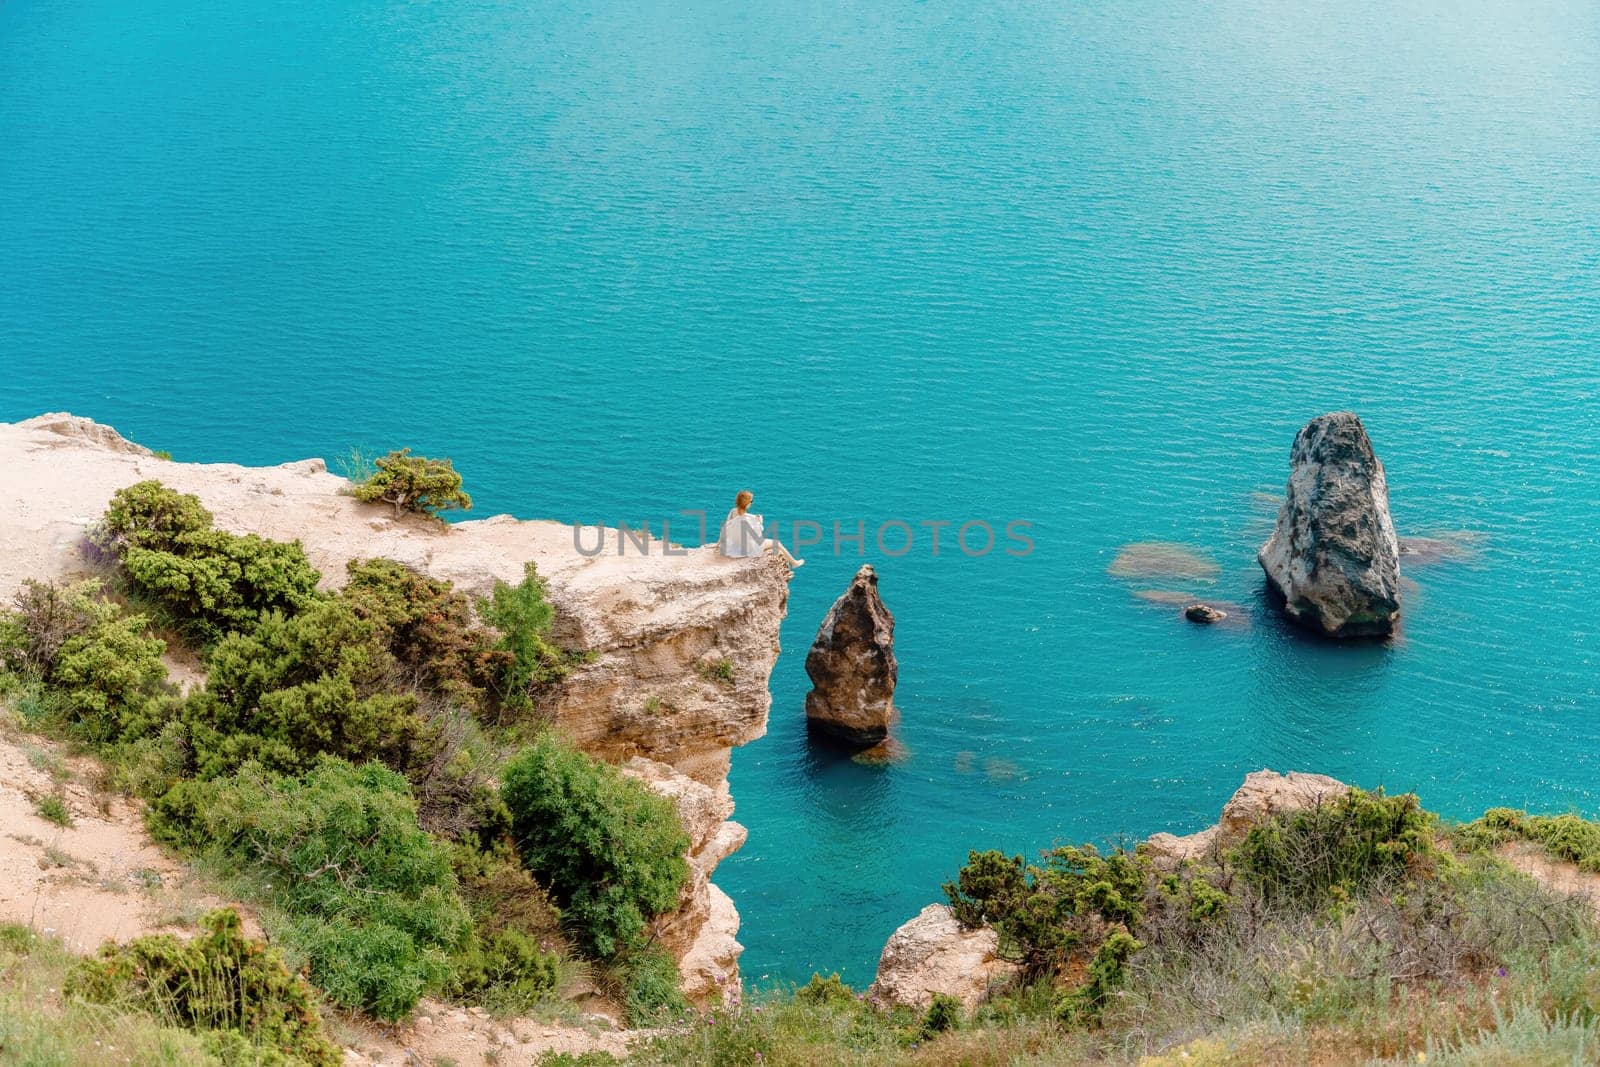 A woman sits on a rock overlooking the ocean. The water is blue and calm. The scene is peaceful and serene